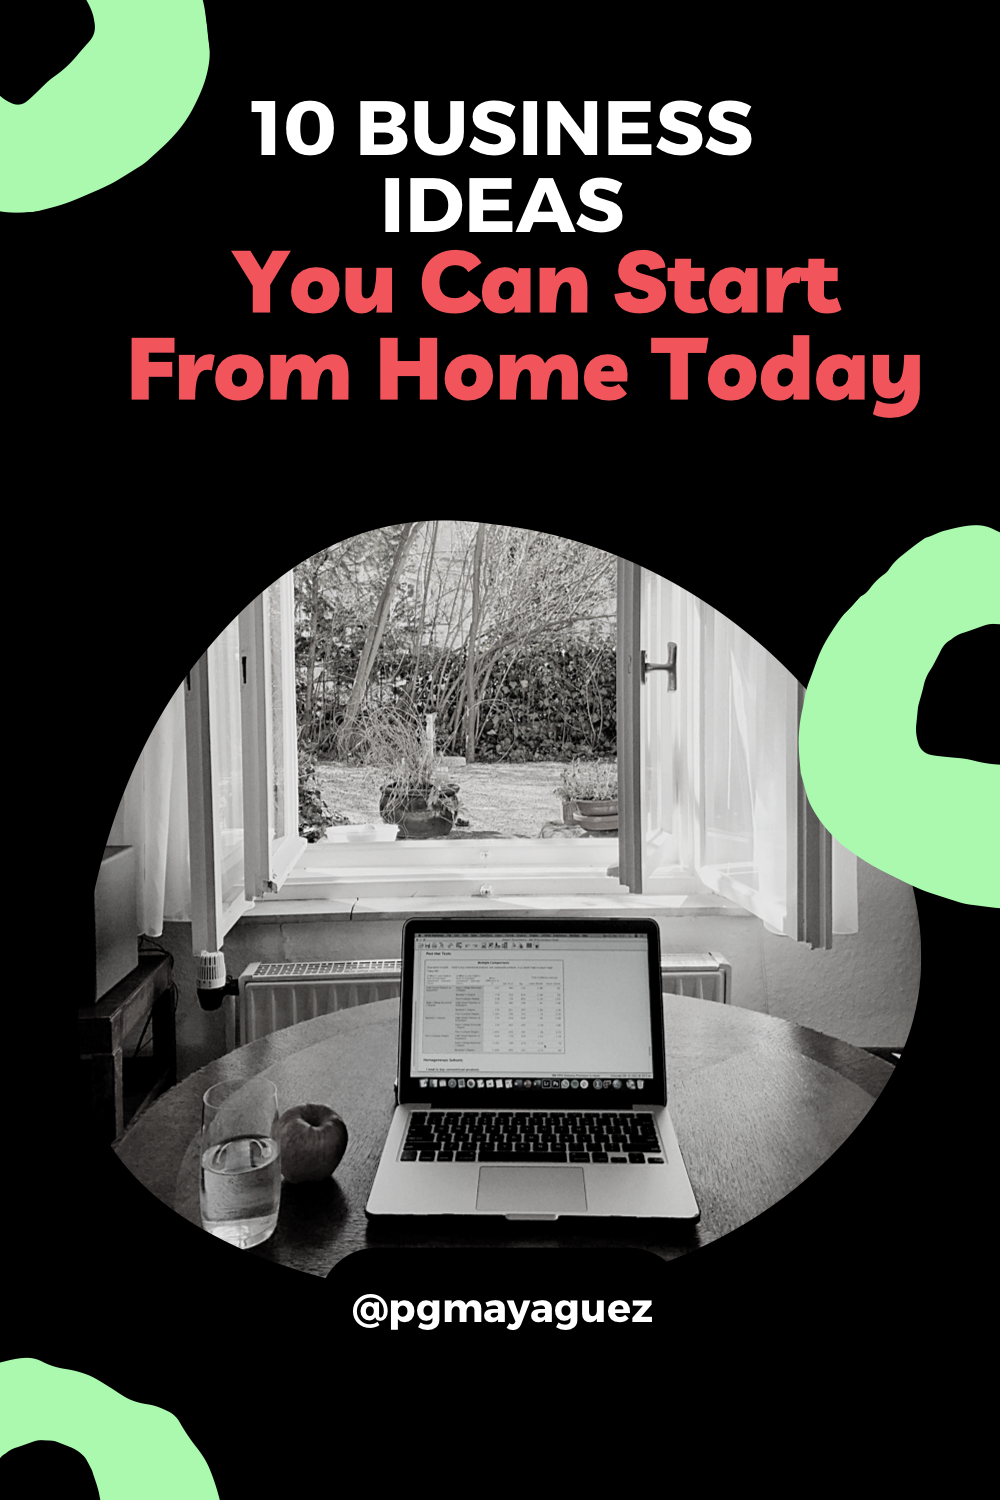 10 Business Ideas You Can Start From Home Today